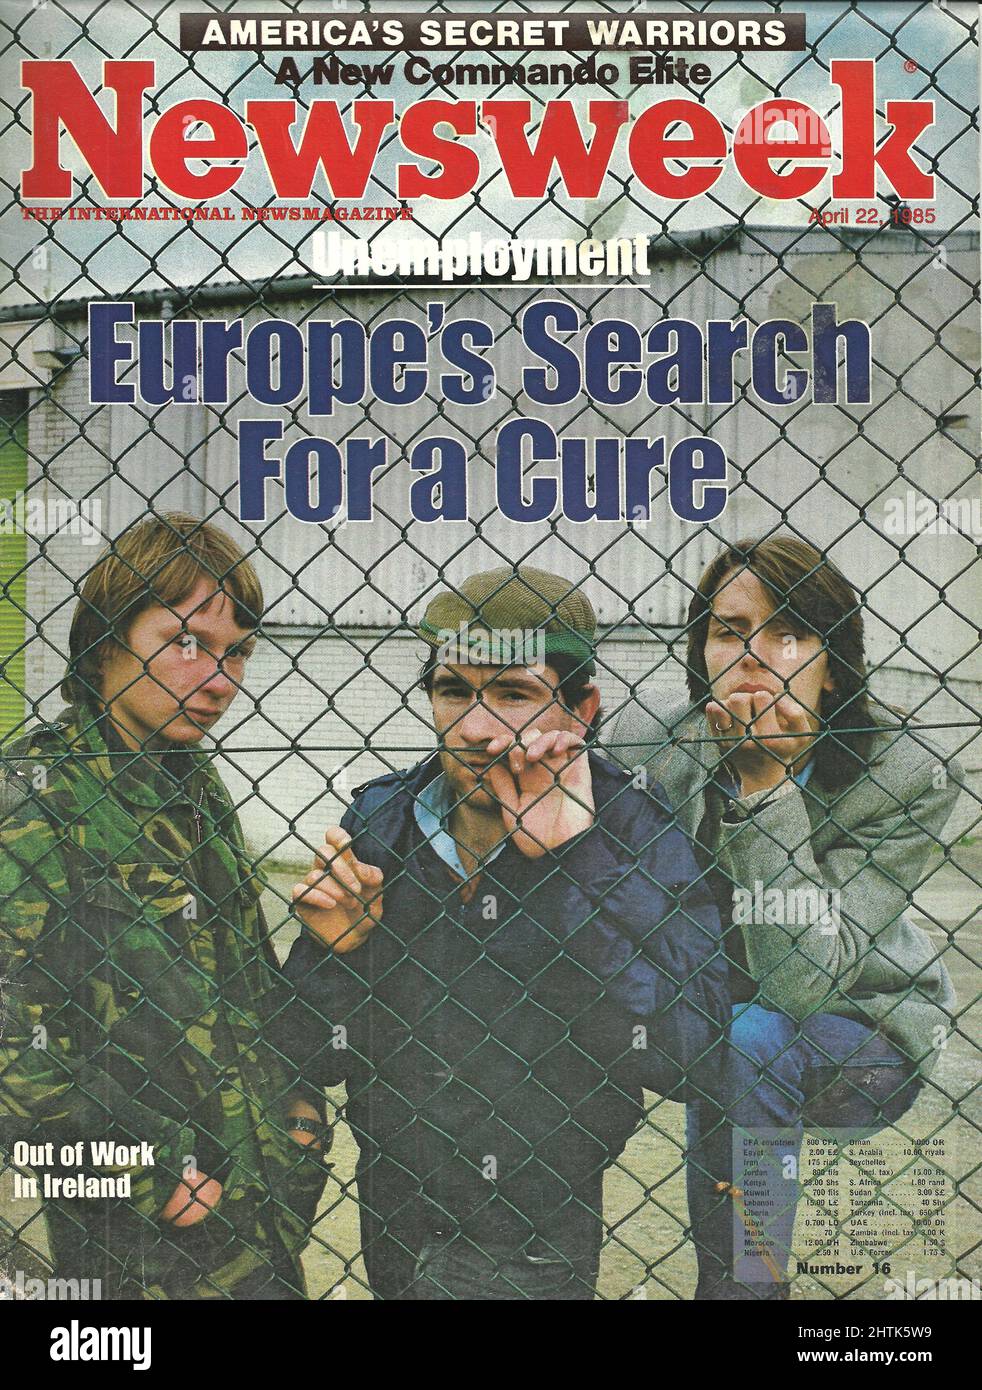 Newsweek cover April 22 1985 Unemployment Europe's search for cure Out of work in Ireland Stock Photo